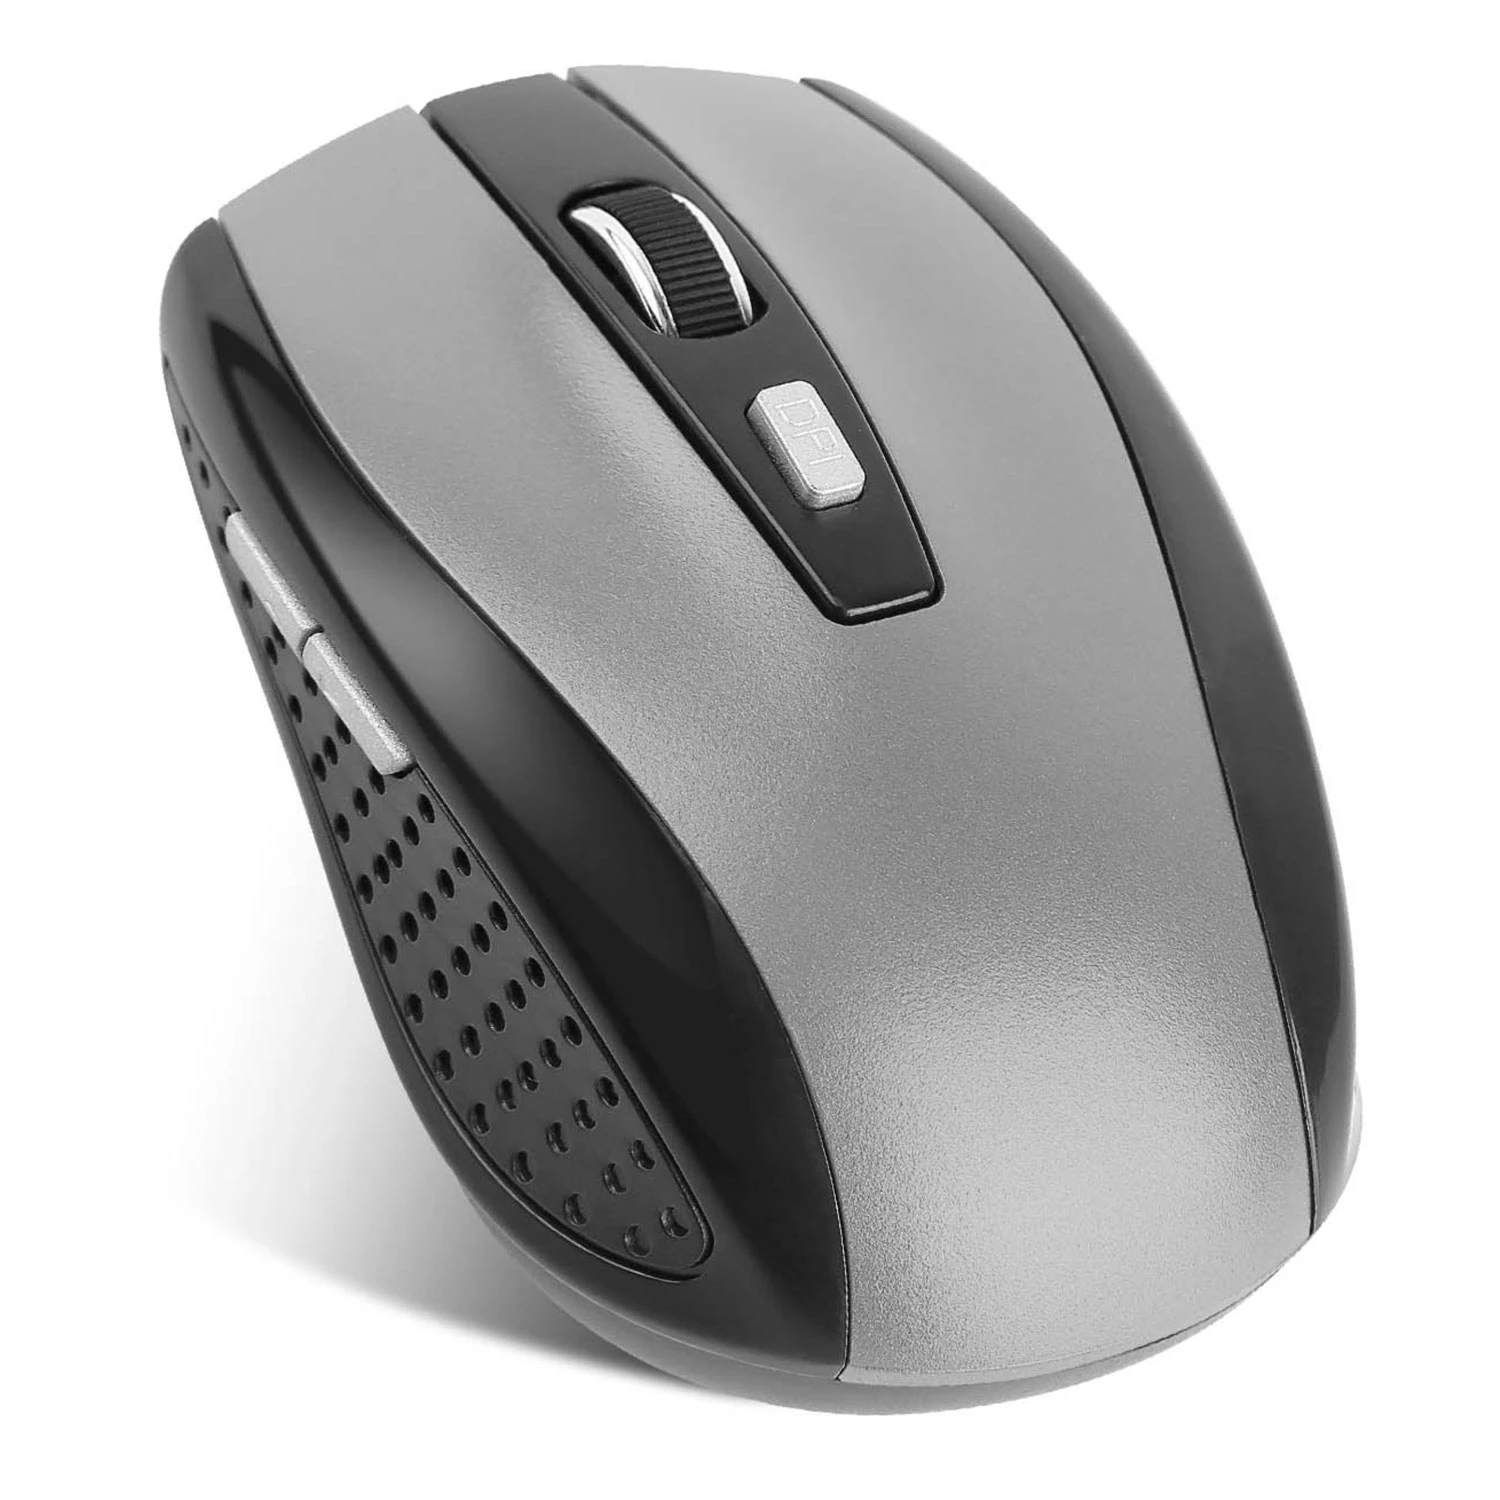 2.4G Wireless Gaming Mouse, 3 Adjustable DPI, 6 Buttons, for PC Laptop Macbook